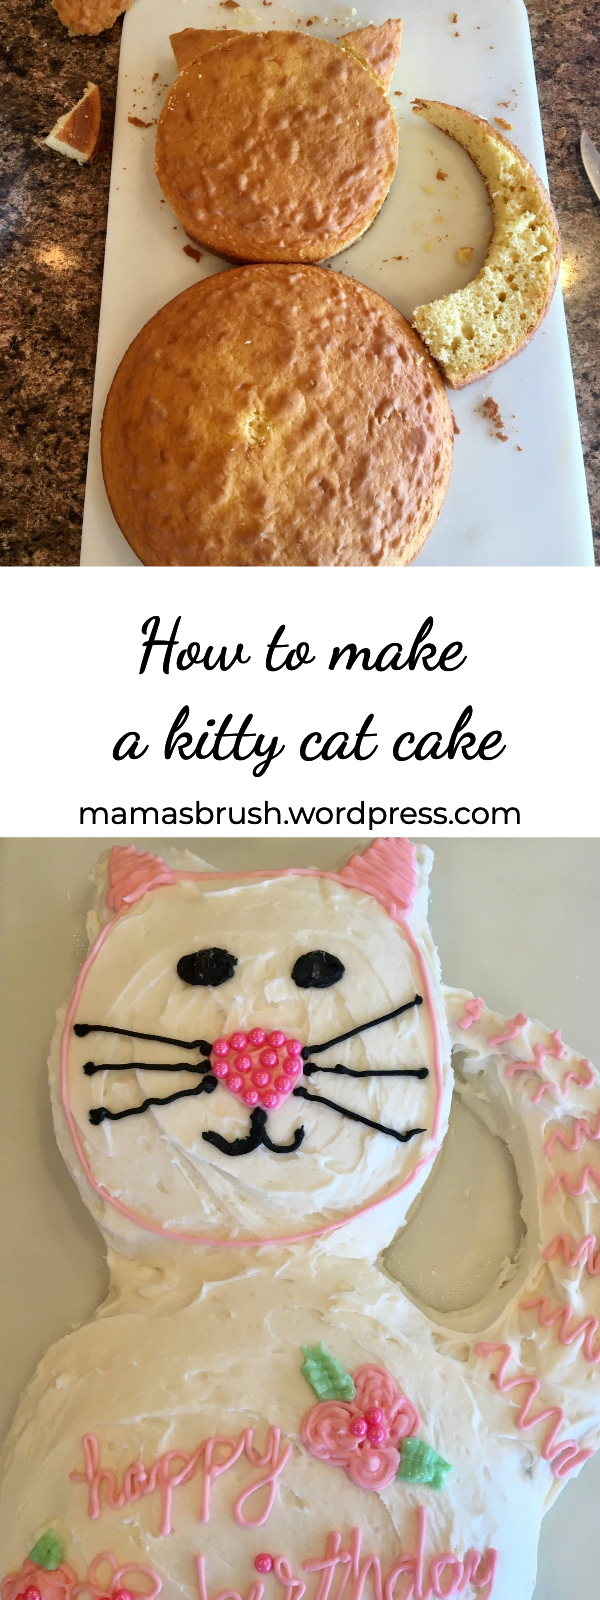 How to make an Easy Kitty Cat Cake from a Box Mix and Standard Pans